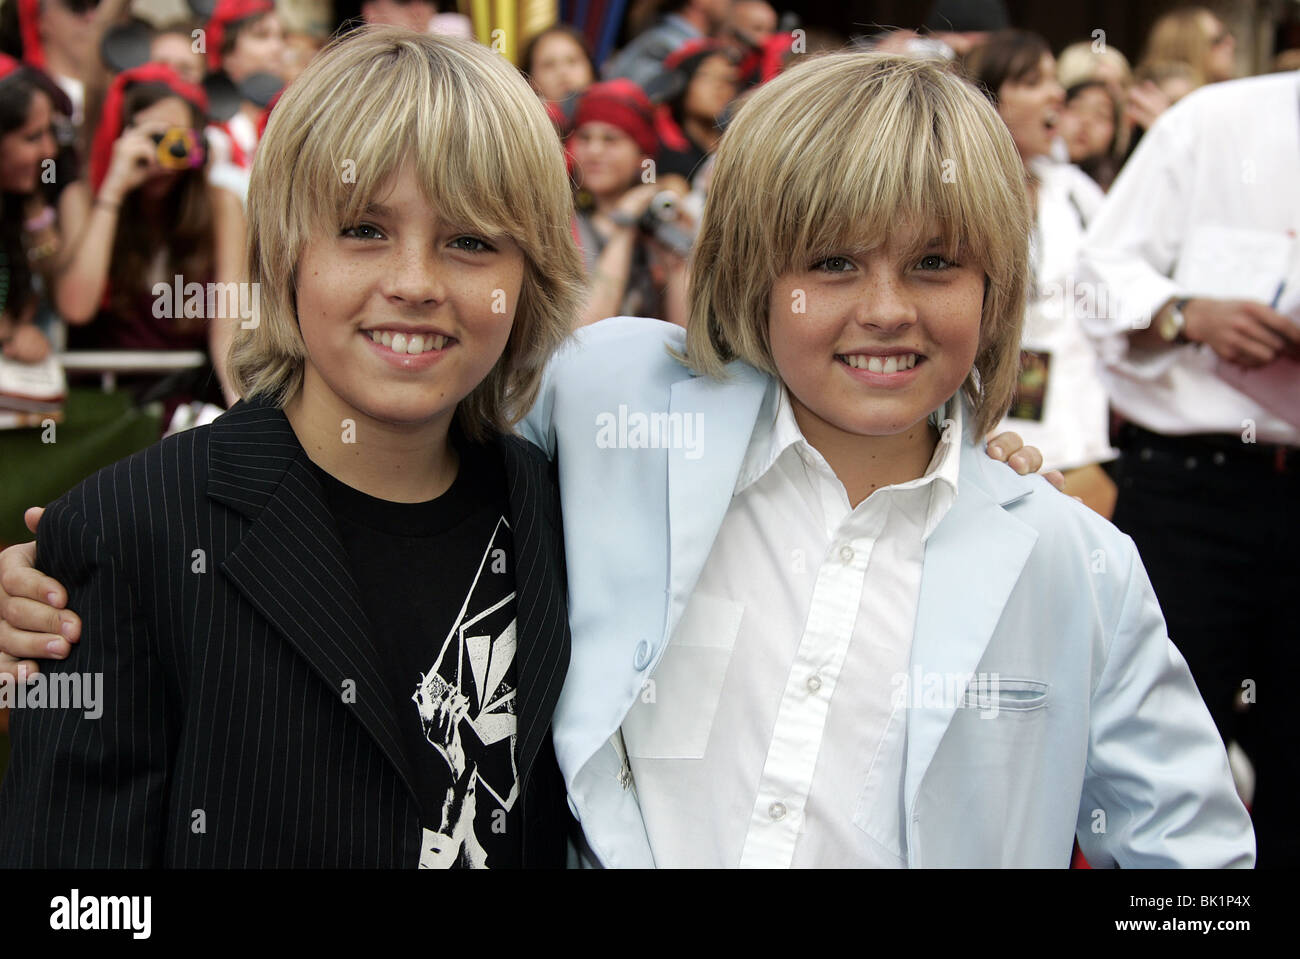 COLE SPROUSE & DYLAN SPROUSE PIRATES OF THE CARIBBEAN: DEAD MANS CHEST WORLD PREMIERE DISNEYLAND LOS ANGELES USA 24 June 2006 Stock Photo